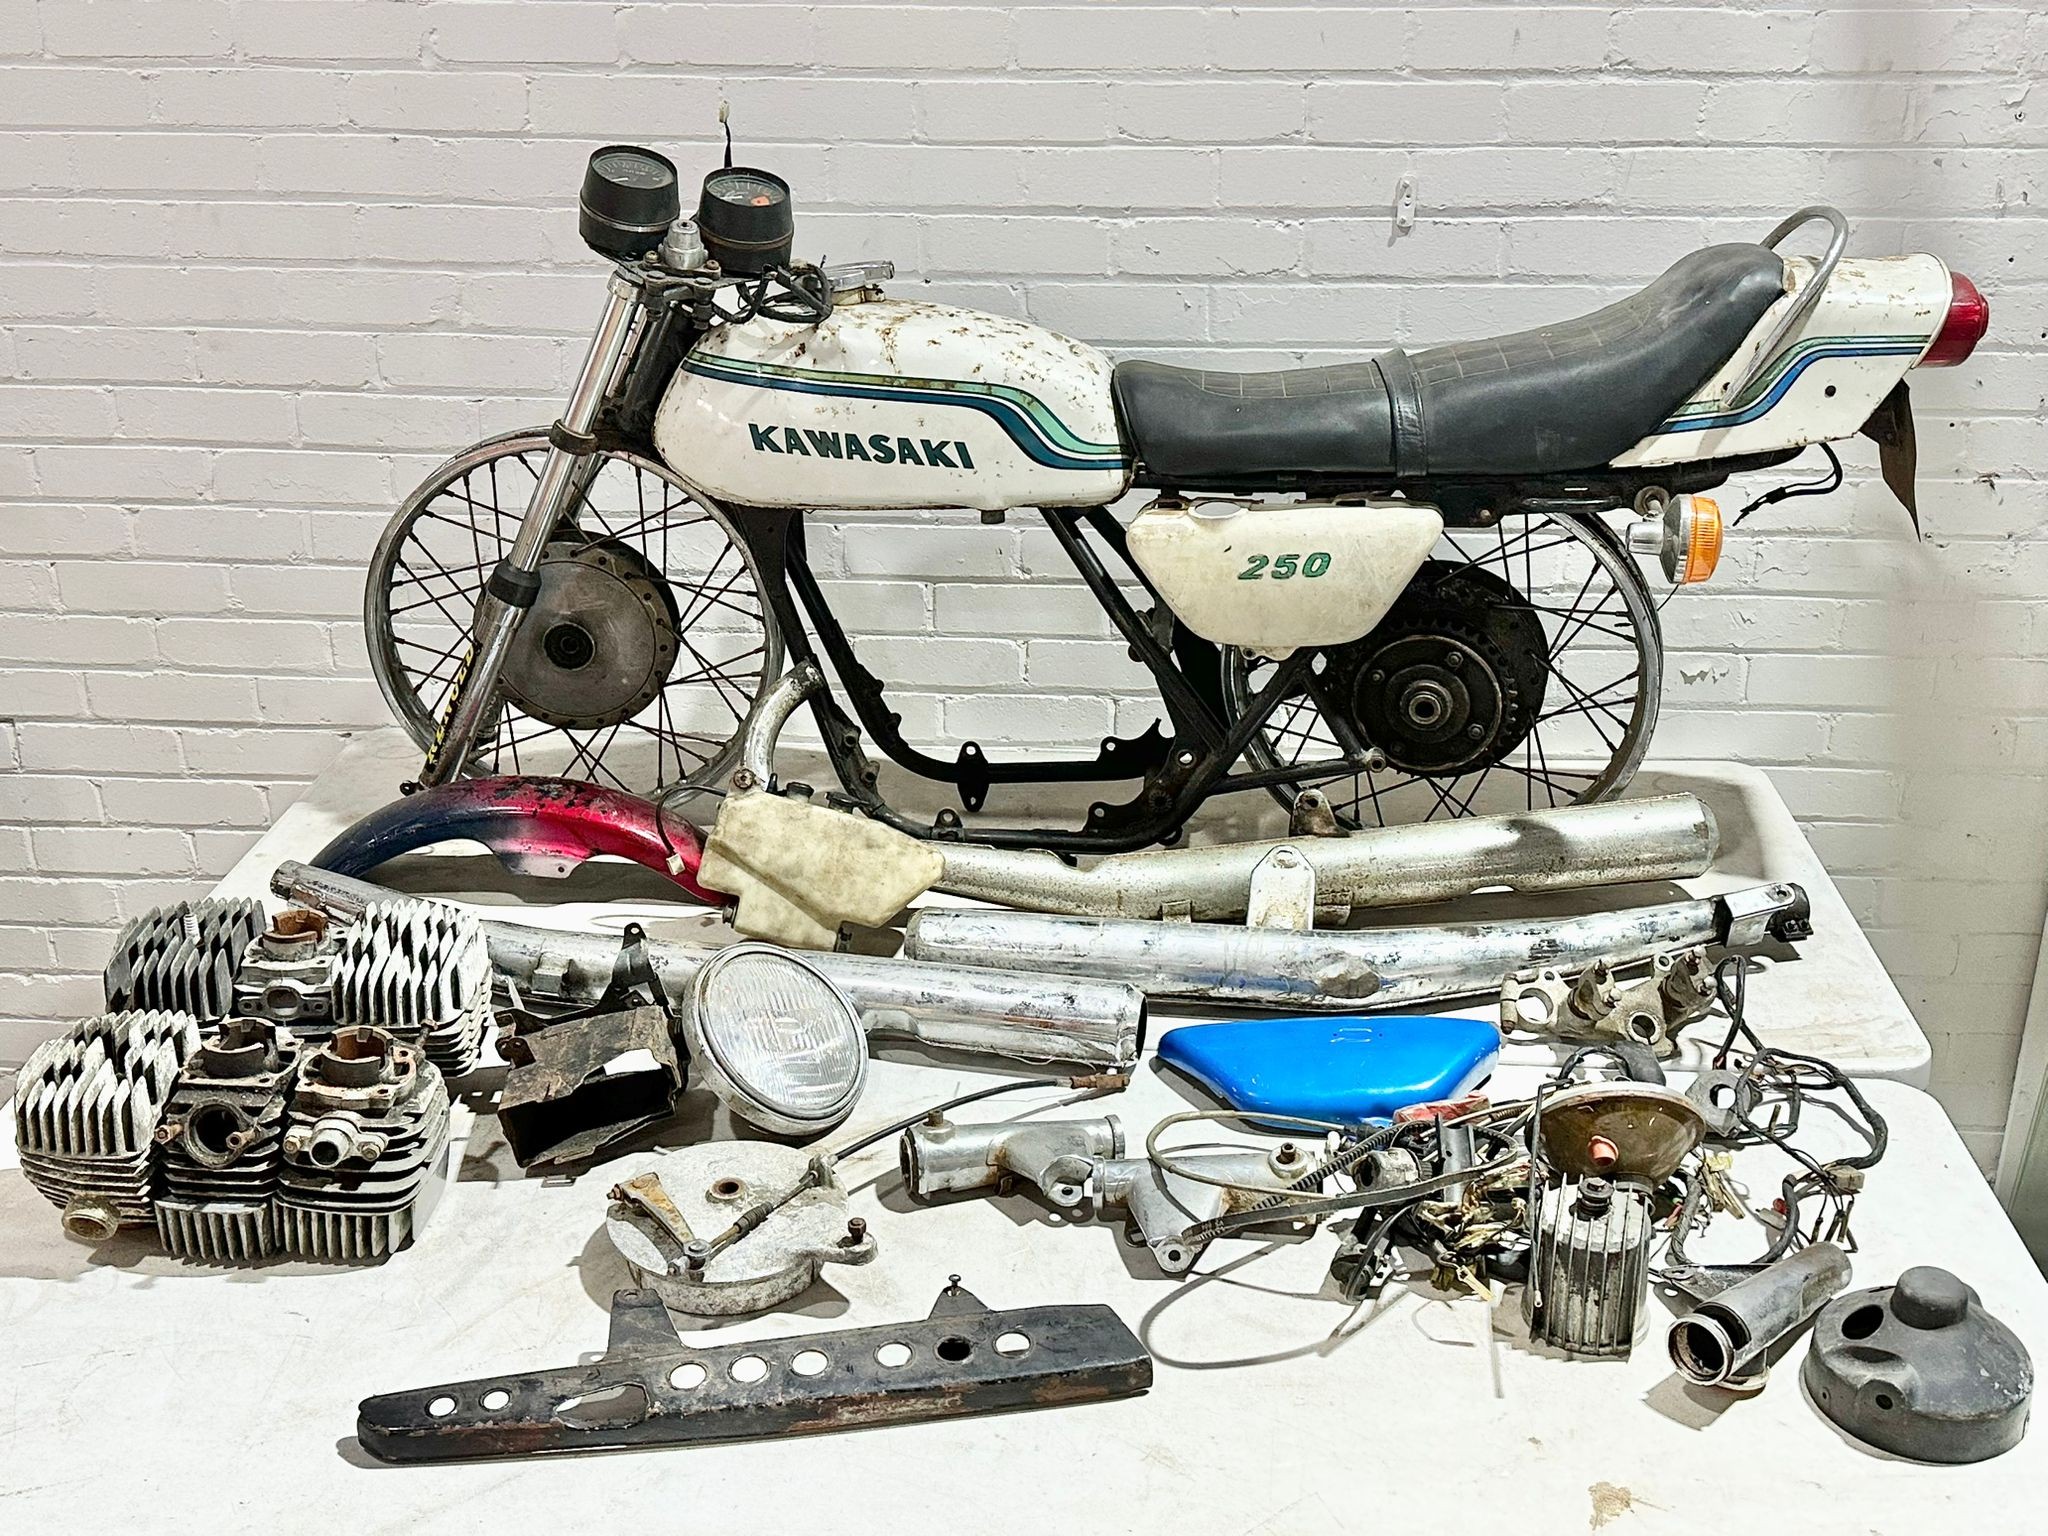 Kawasaki S1 250 White Ghost 2 stroke Frame 1972, with parts, engine and documents